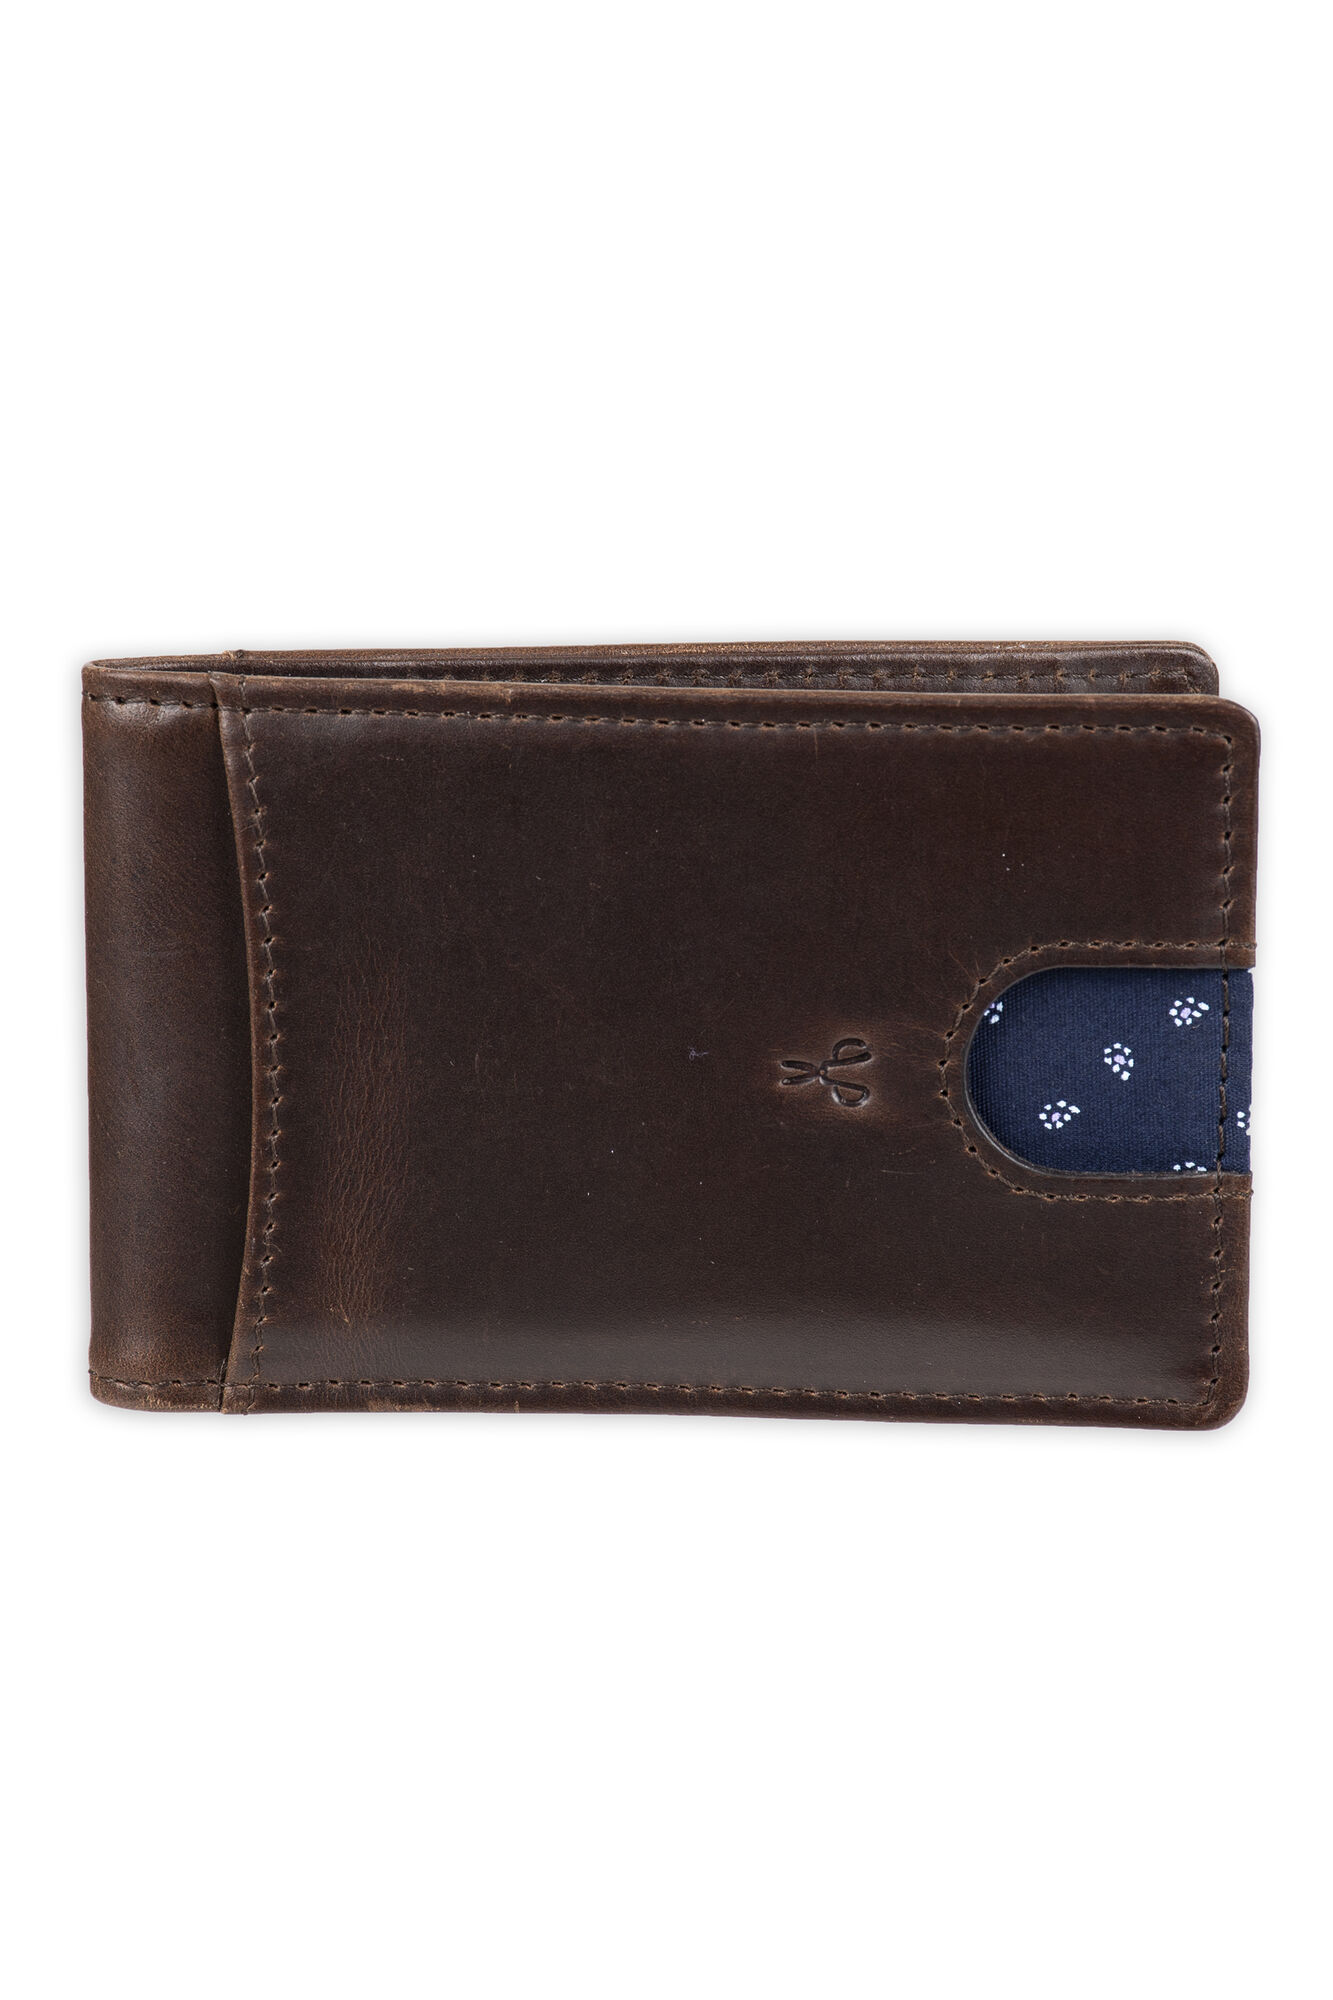 Haggar Rfid Bifold Wallet With Removable Money Clip - Best Dad Ever Engraving Brown (31DN160011) photo